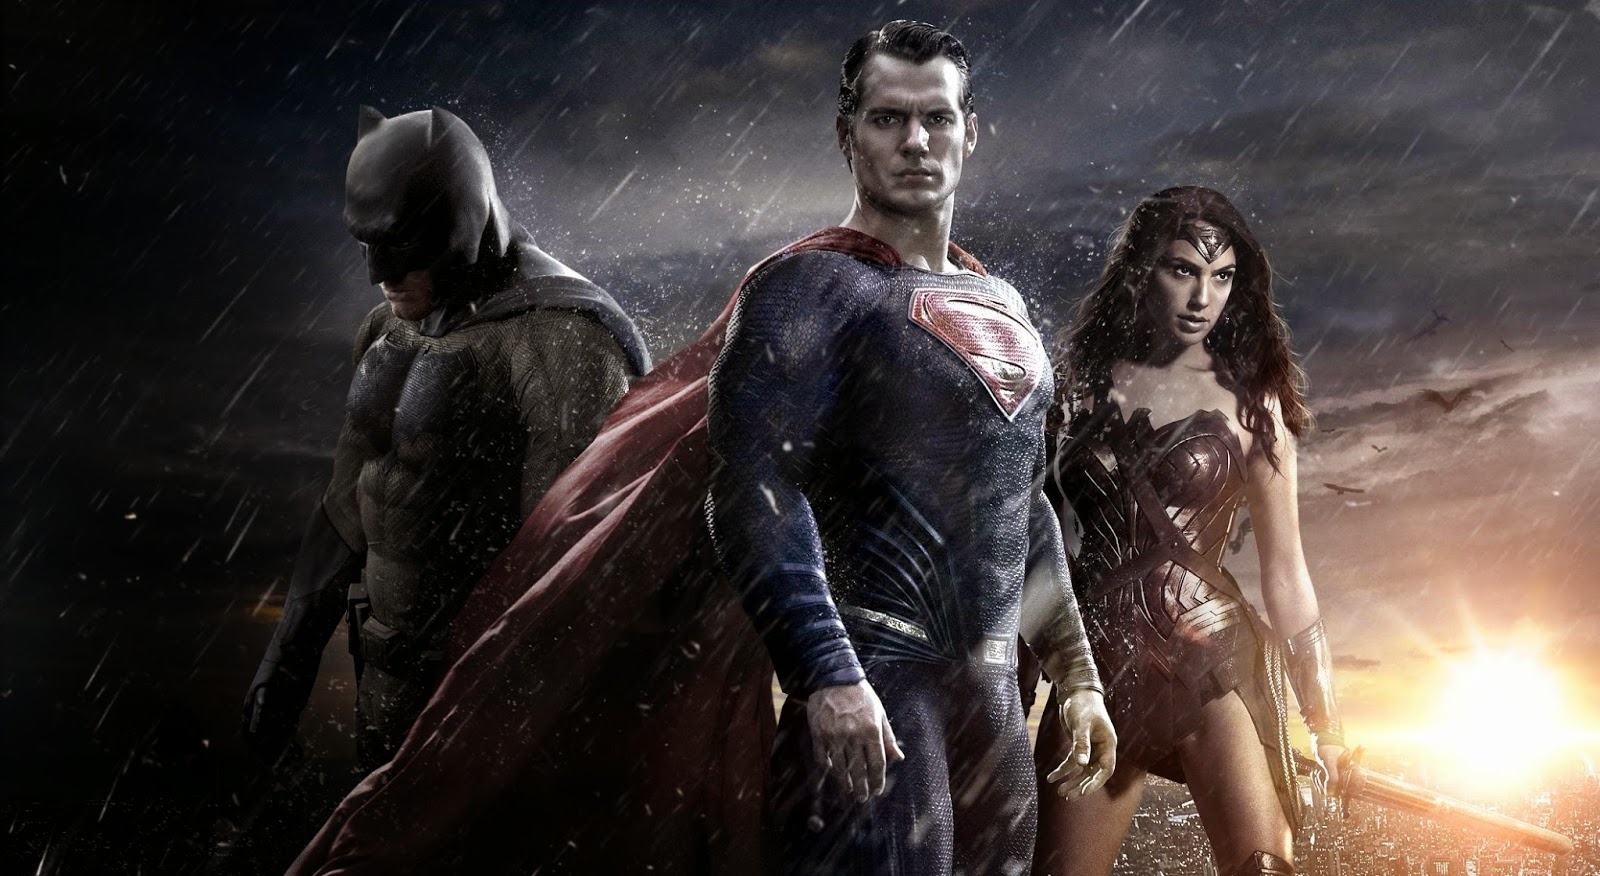 Why Warner Bros Desperately Needs 'Batman v Superman' to Be a Blockbuster |  The Fiscal Times